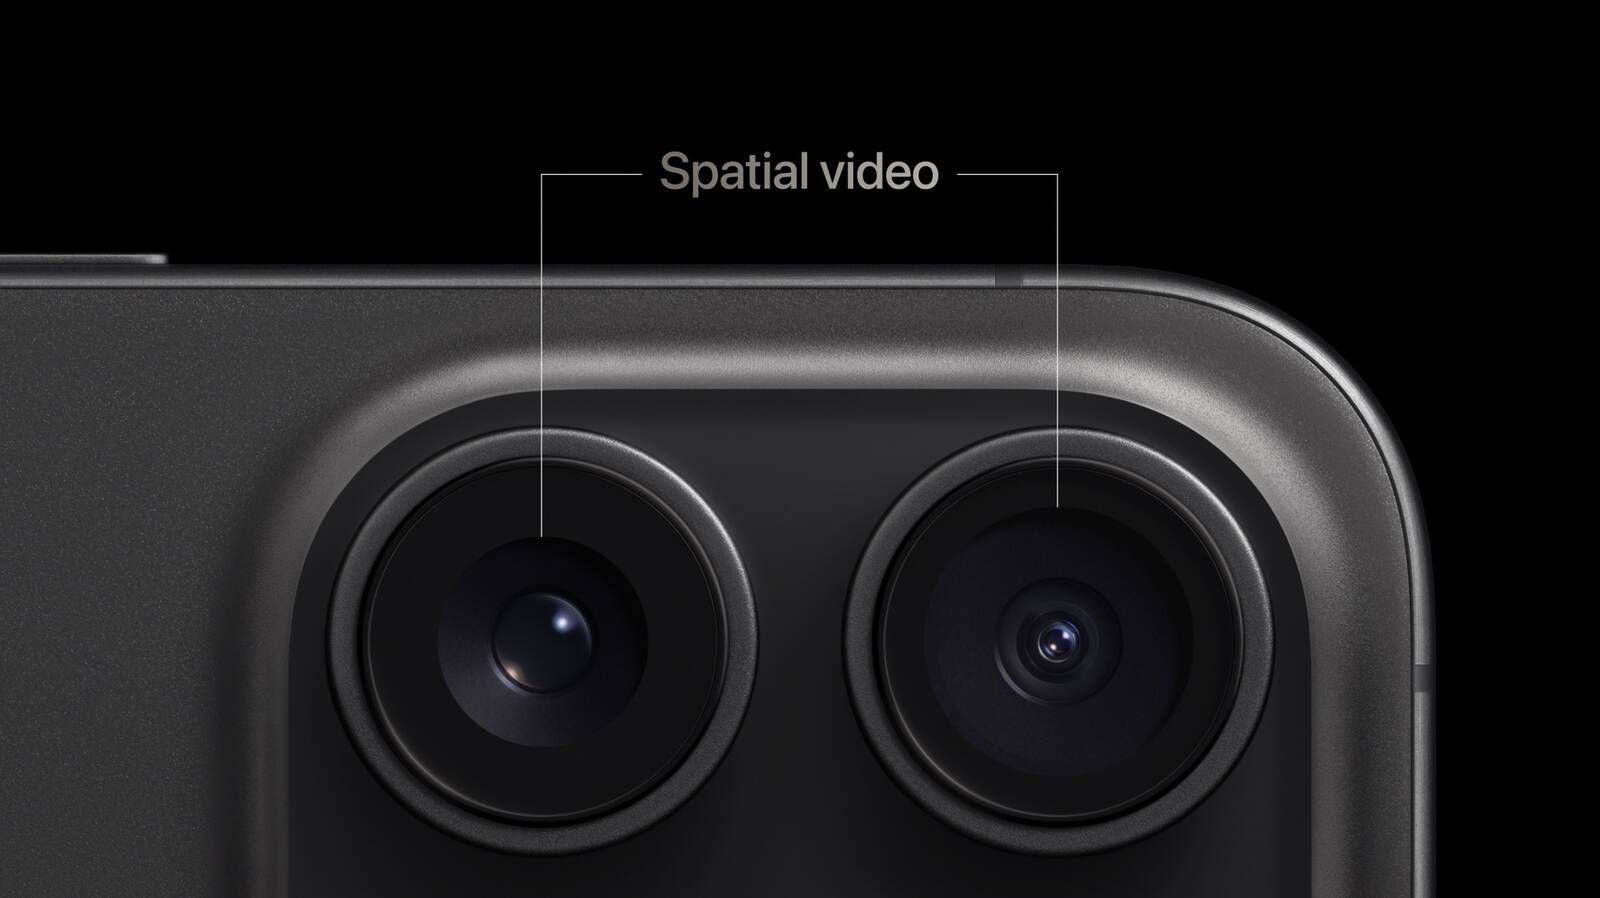 $3 App Shoots Better Quality Spatial Video Than iPhone's Camera App